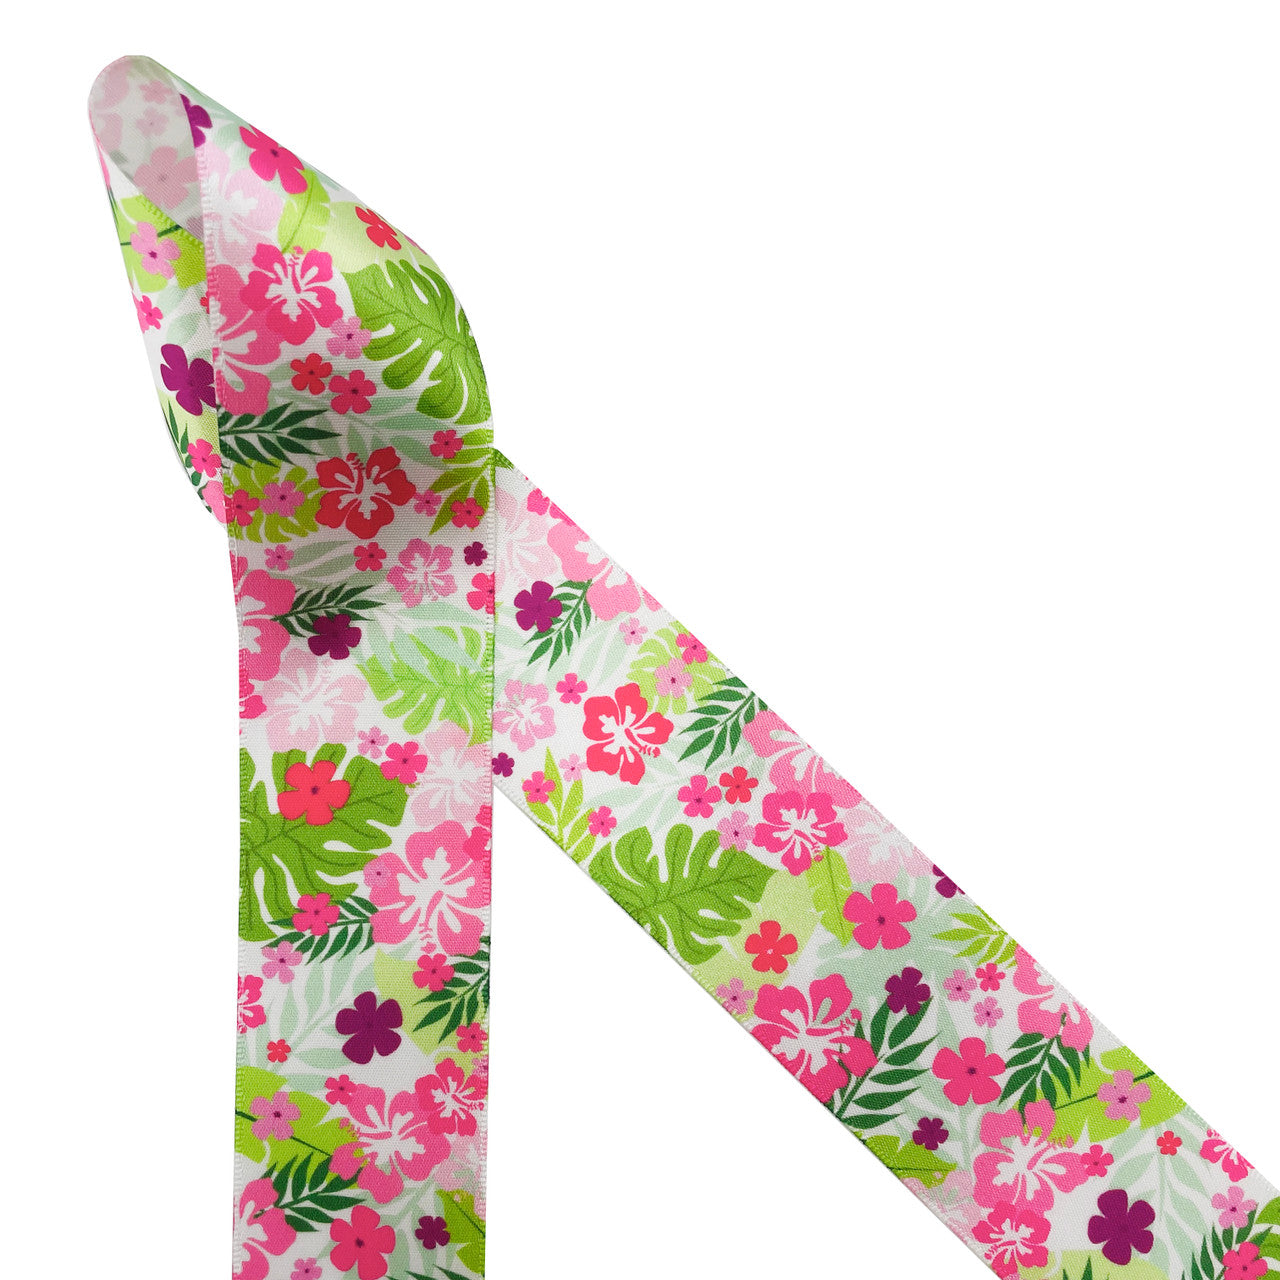 Lily inspired floral ribbon hot pink flowers with green palm fronds and ferns printed on 5/8" and 1.5" white single face satin